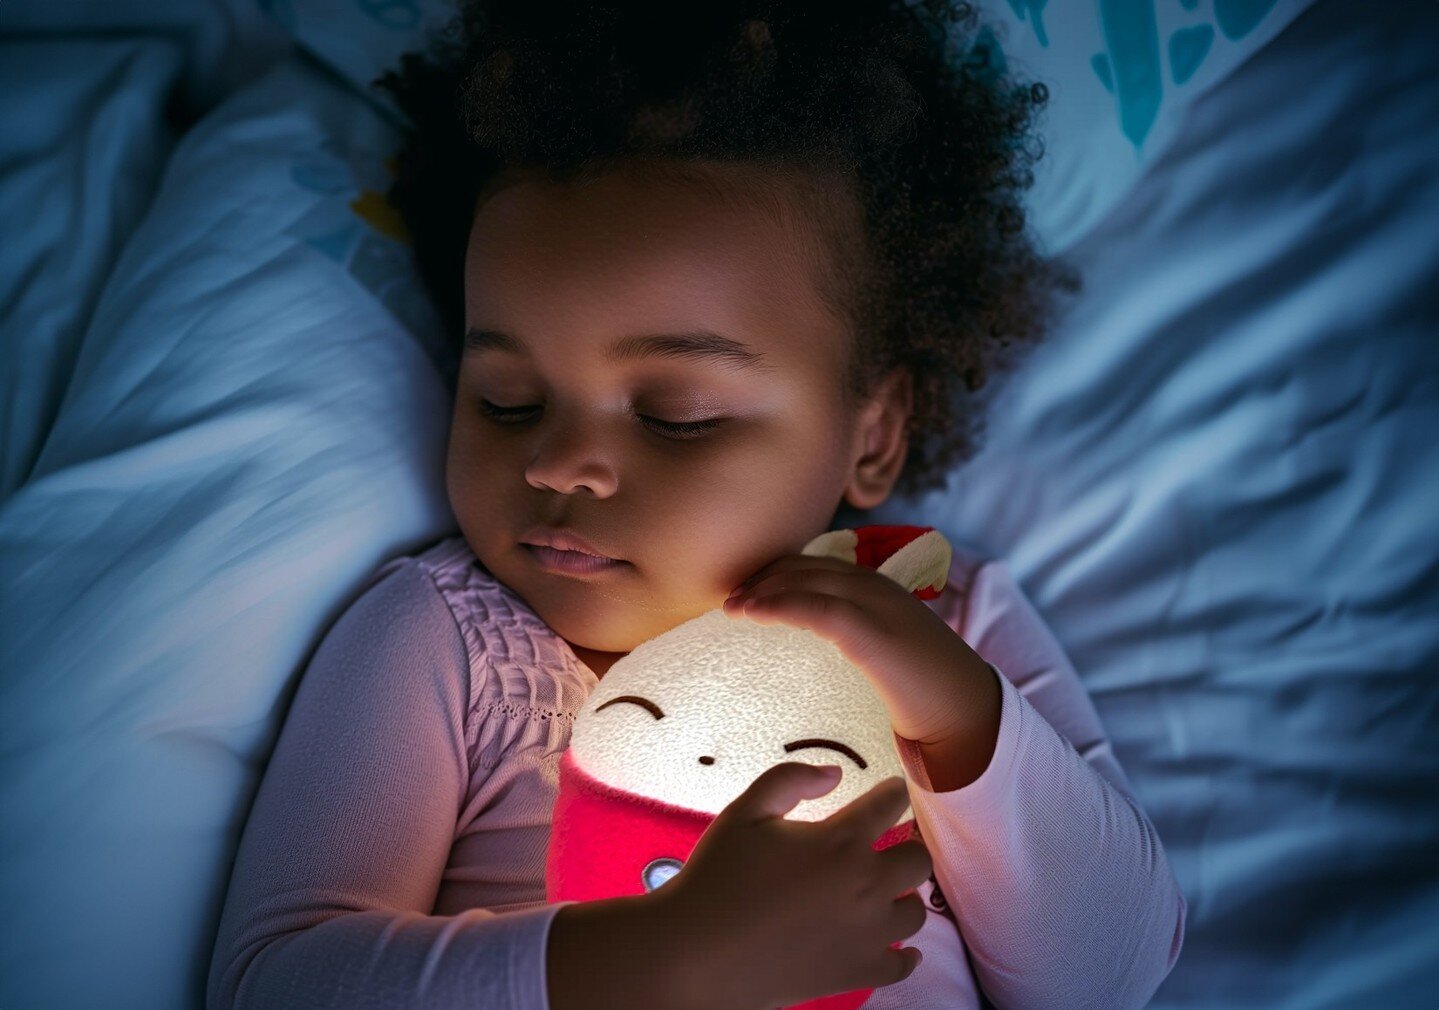 Because I could watch you for a single minute and find a thousand things that I love about you. ❤️❤️❤️⁠
⁠
#luminightlight #plushlight #sweetdreams #toddlersleep #adorable #toddlerlife #toddlersofinstagram #parentlife #momlife #dadlife